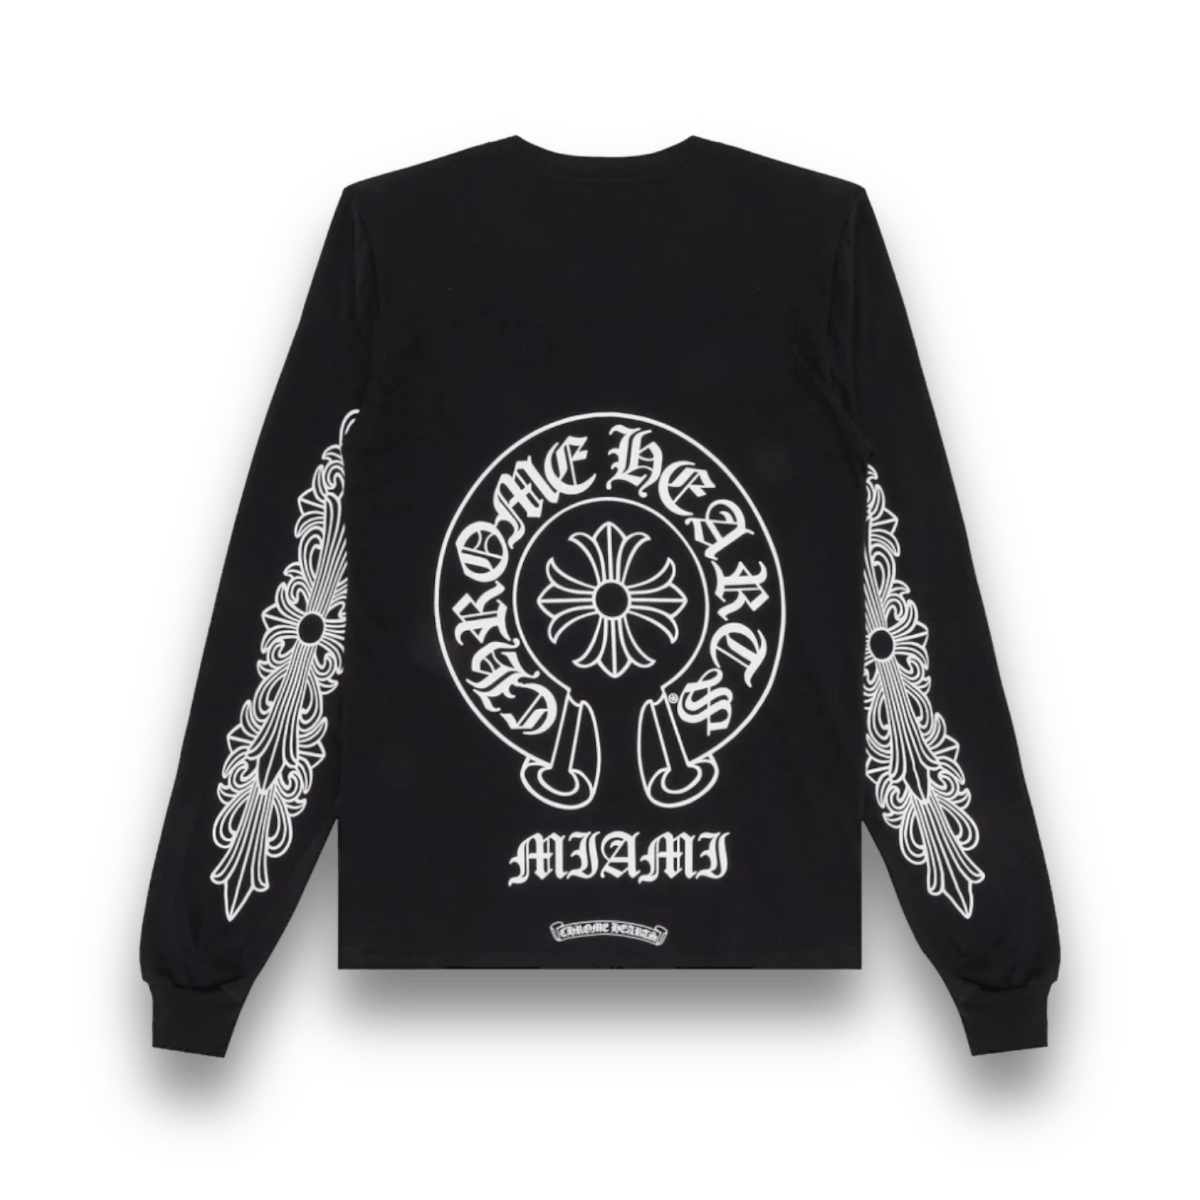 Chrome Hearts Miami Exclusive Long-Sleeve T-Shirt 'Black/White' - sneaker - Long Sleeve - Chrome Hearts - Jawns on Fire